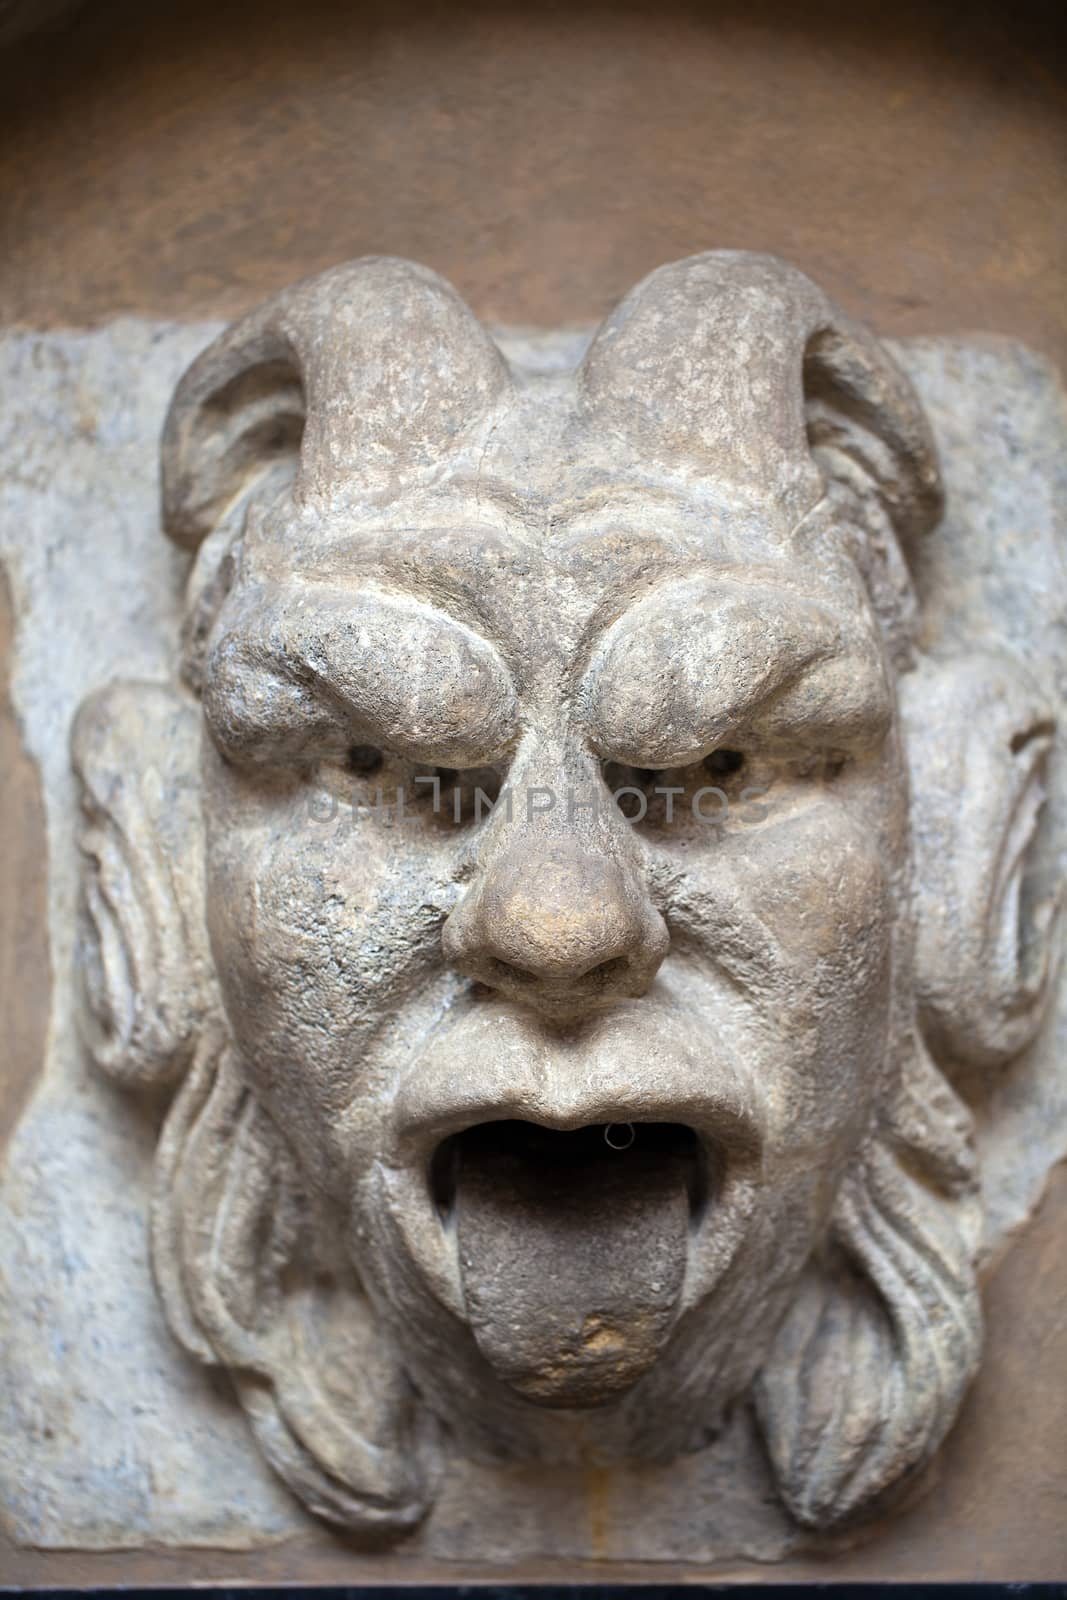 mascaron ornament with sourse of water in collegium maius in cracow